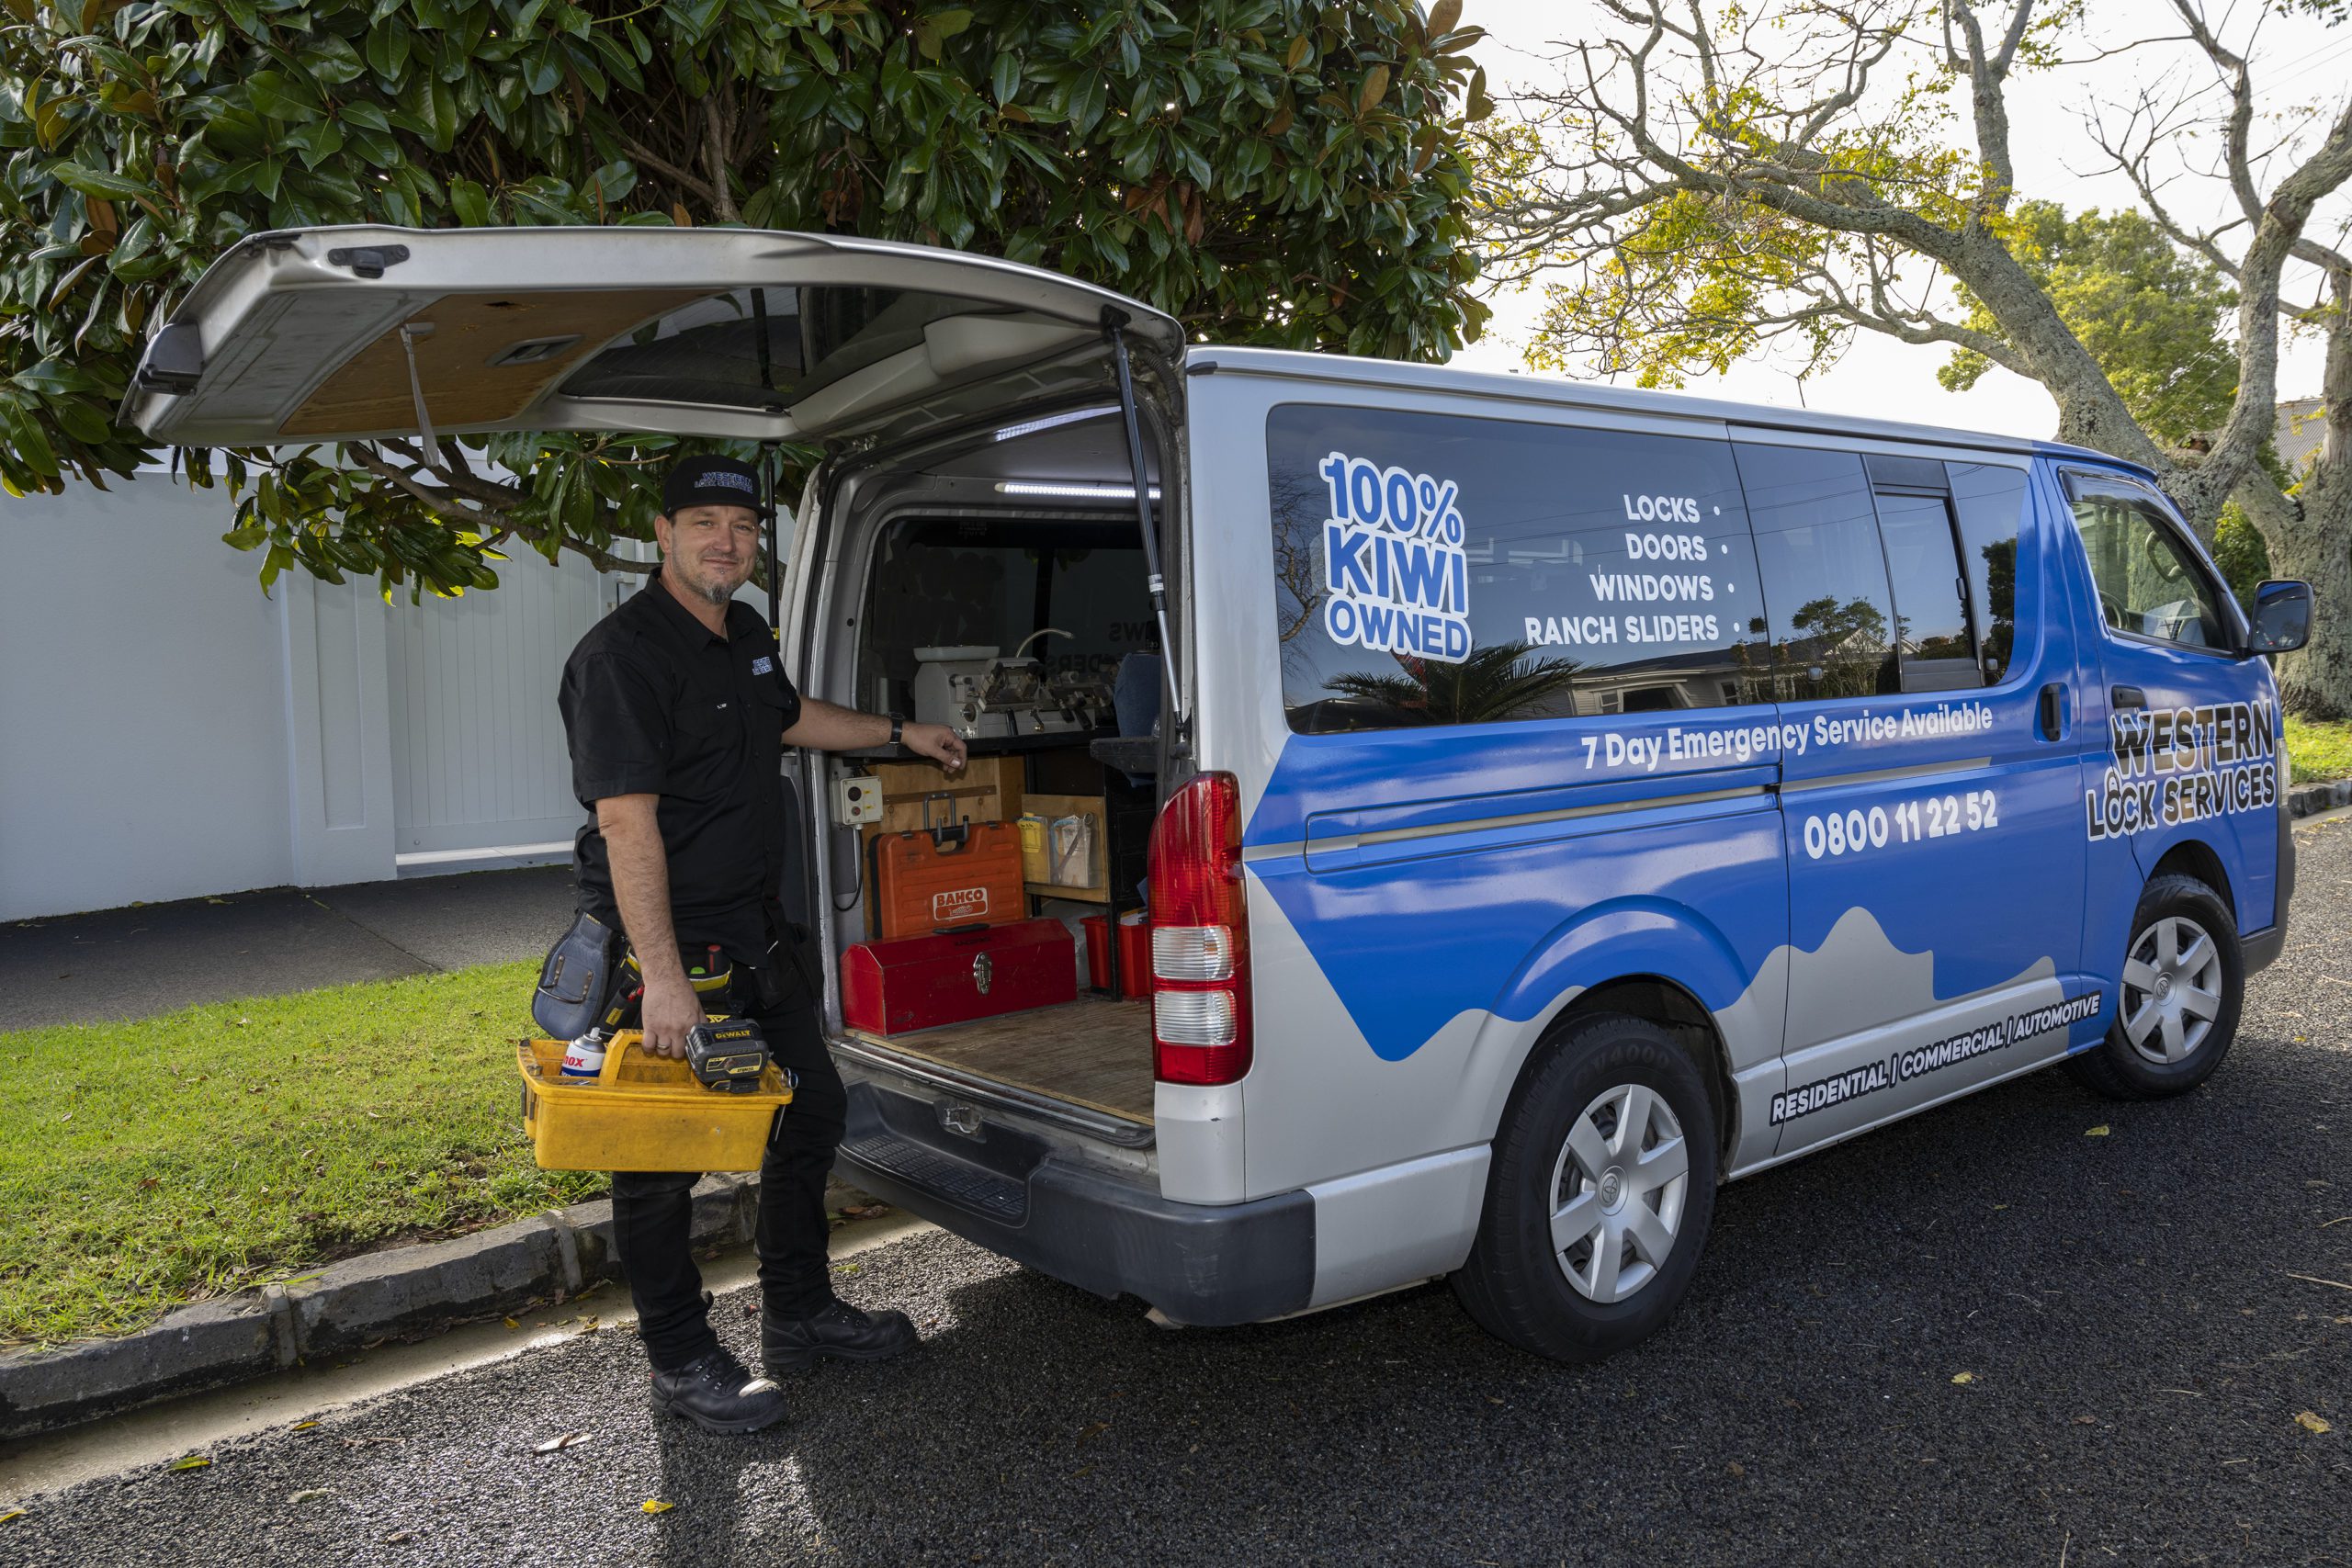 Residential locksmith outside company vehicle